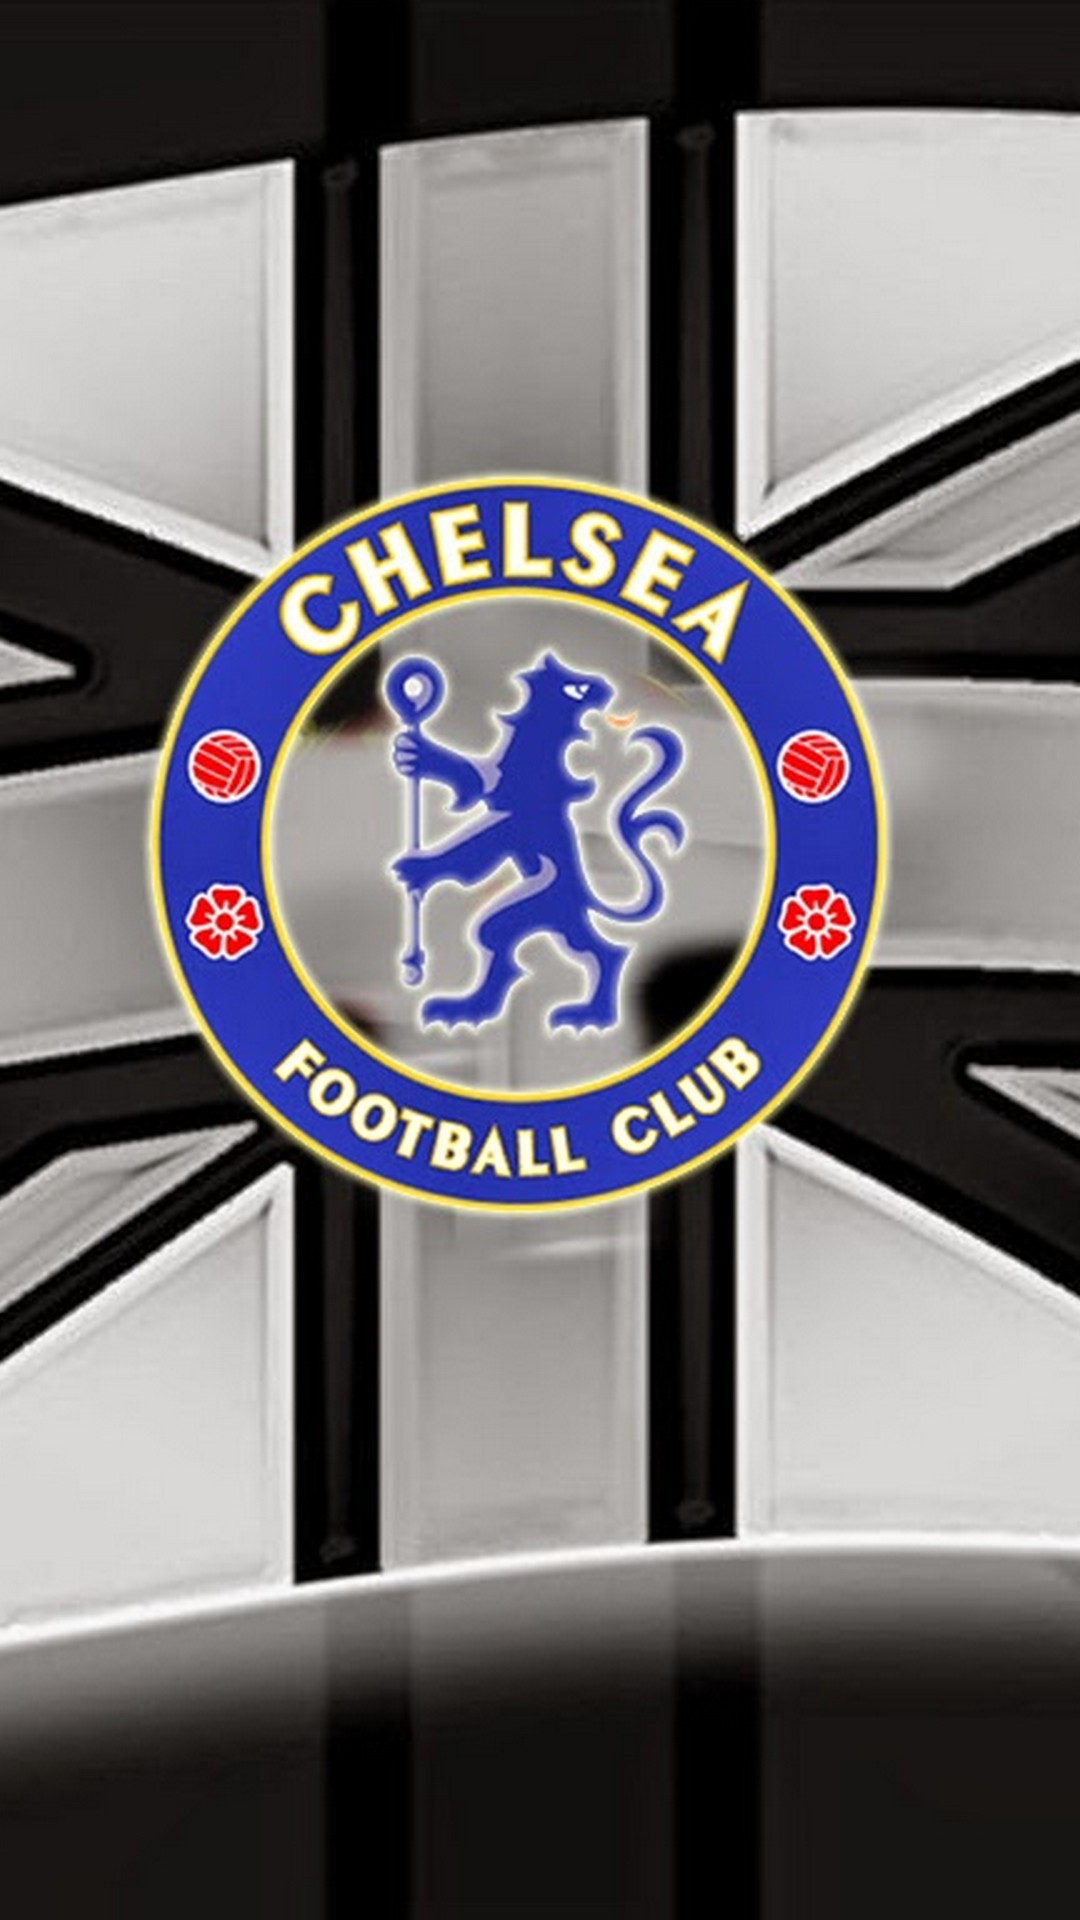 Chelsea Soccer HD Wallpaper For iPhone With Resolution 1080X1920 pixel. You can make this wallpaper for your Mac or Windows Desktop Background, iPhone, Android or Tablet and another Smartphone device for free